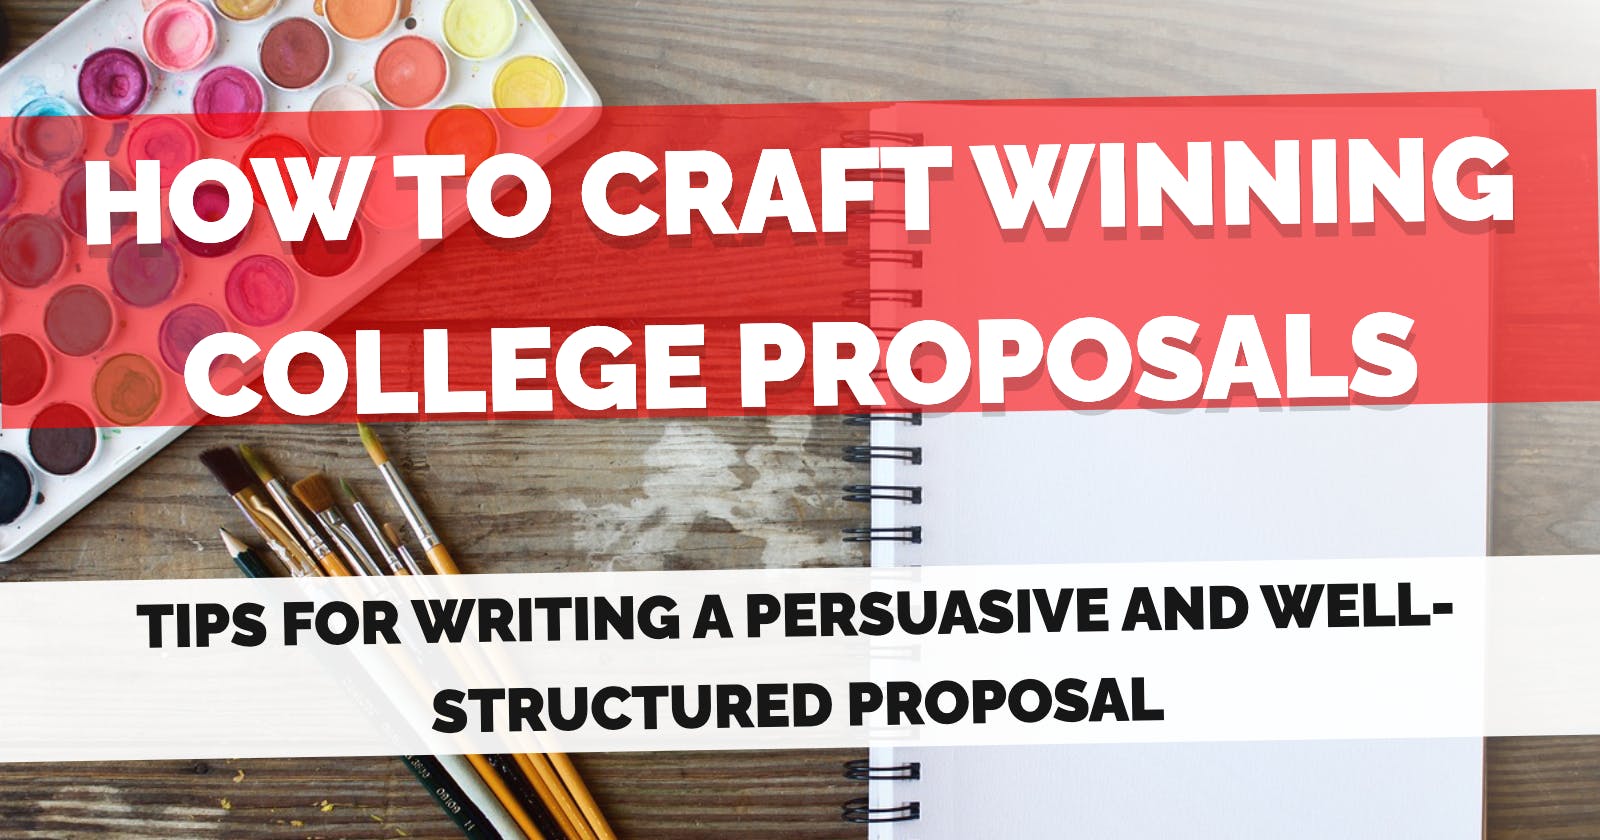 How to craft winning college proposals